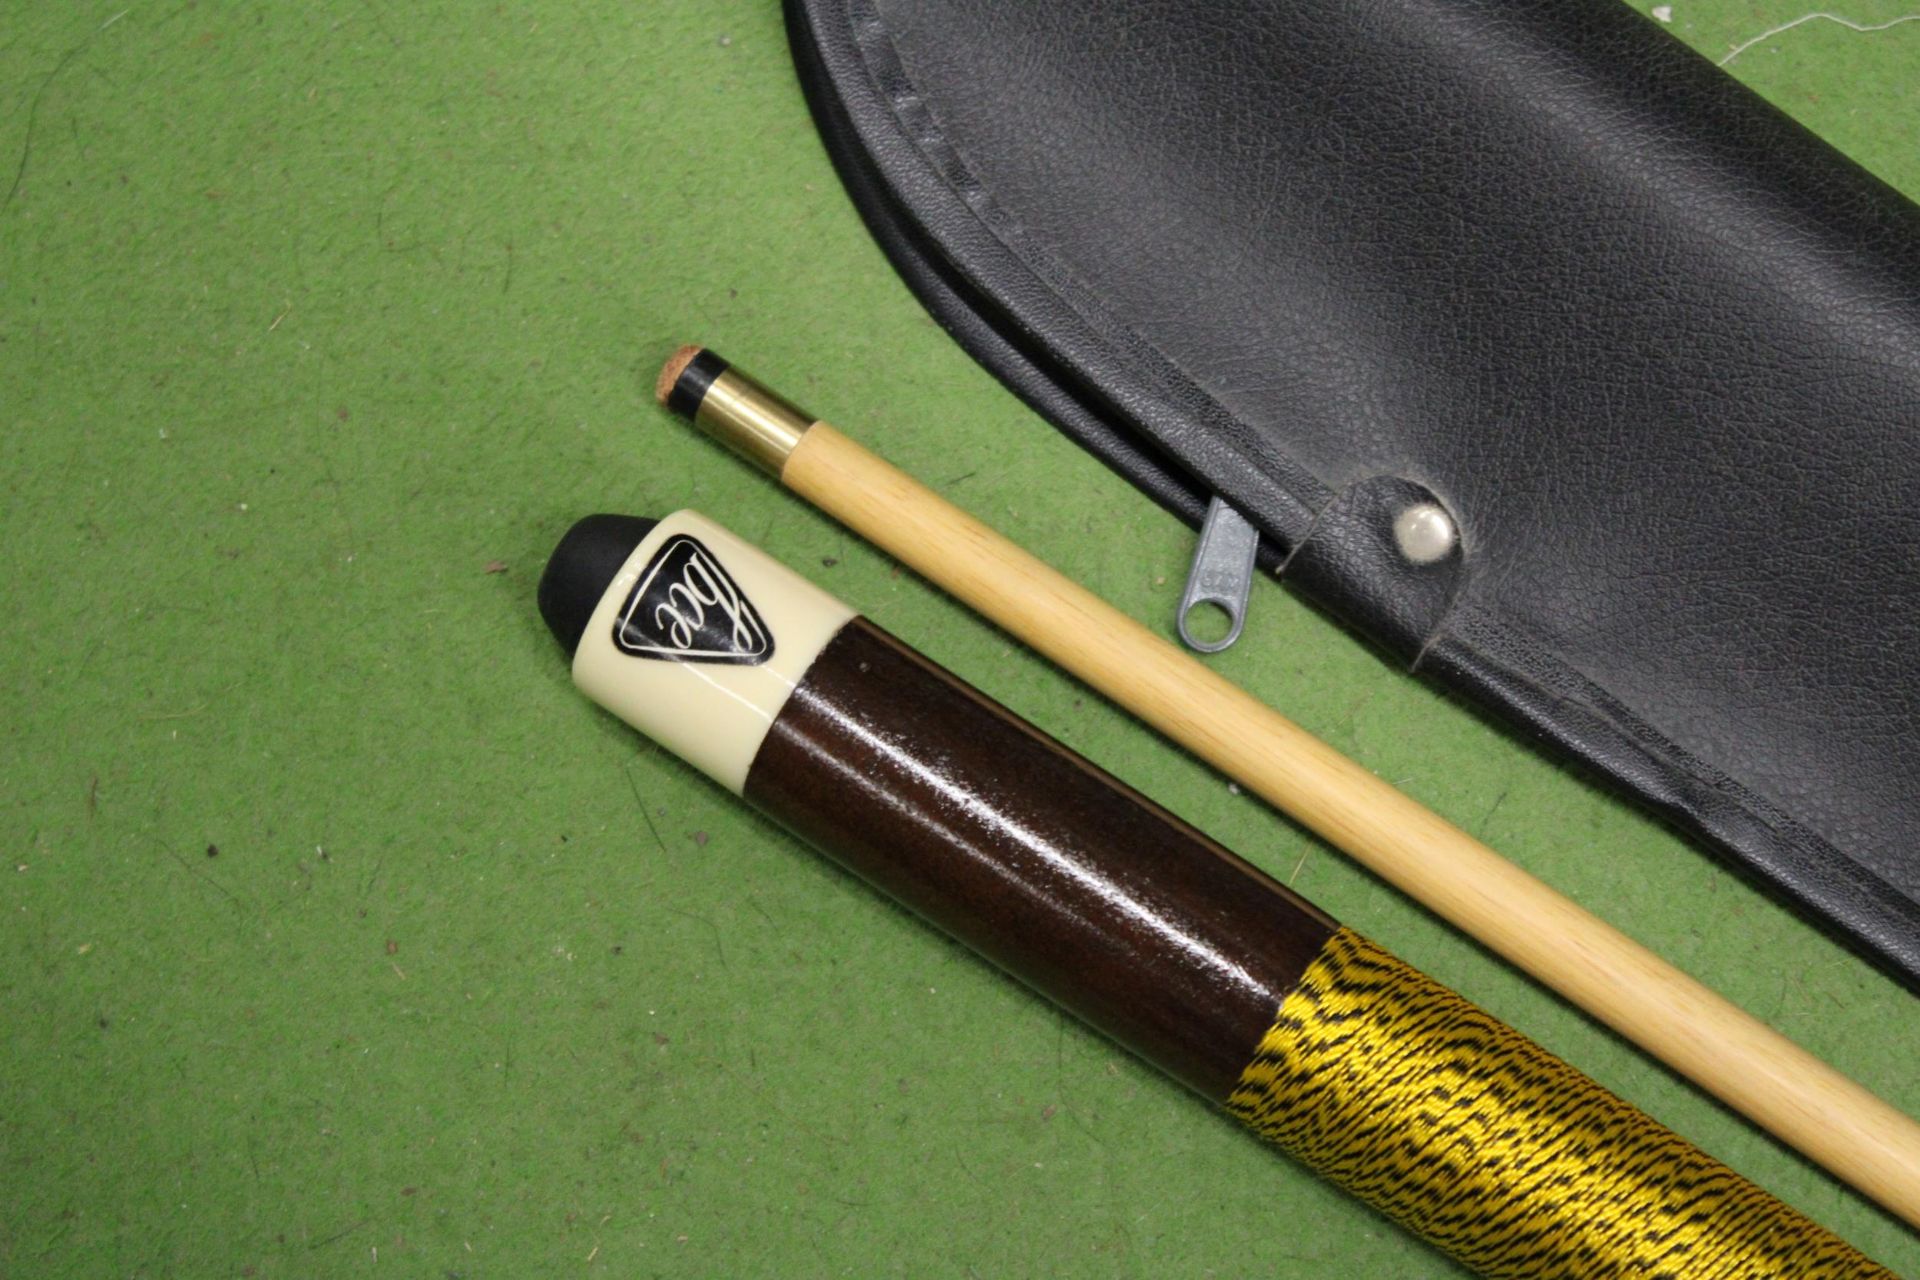 A BCE POOL/SNOOKER CUE IN A SOFT CASE - Image 2 of 6